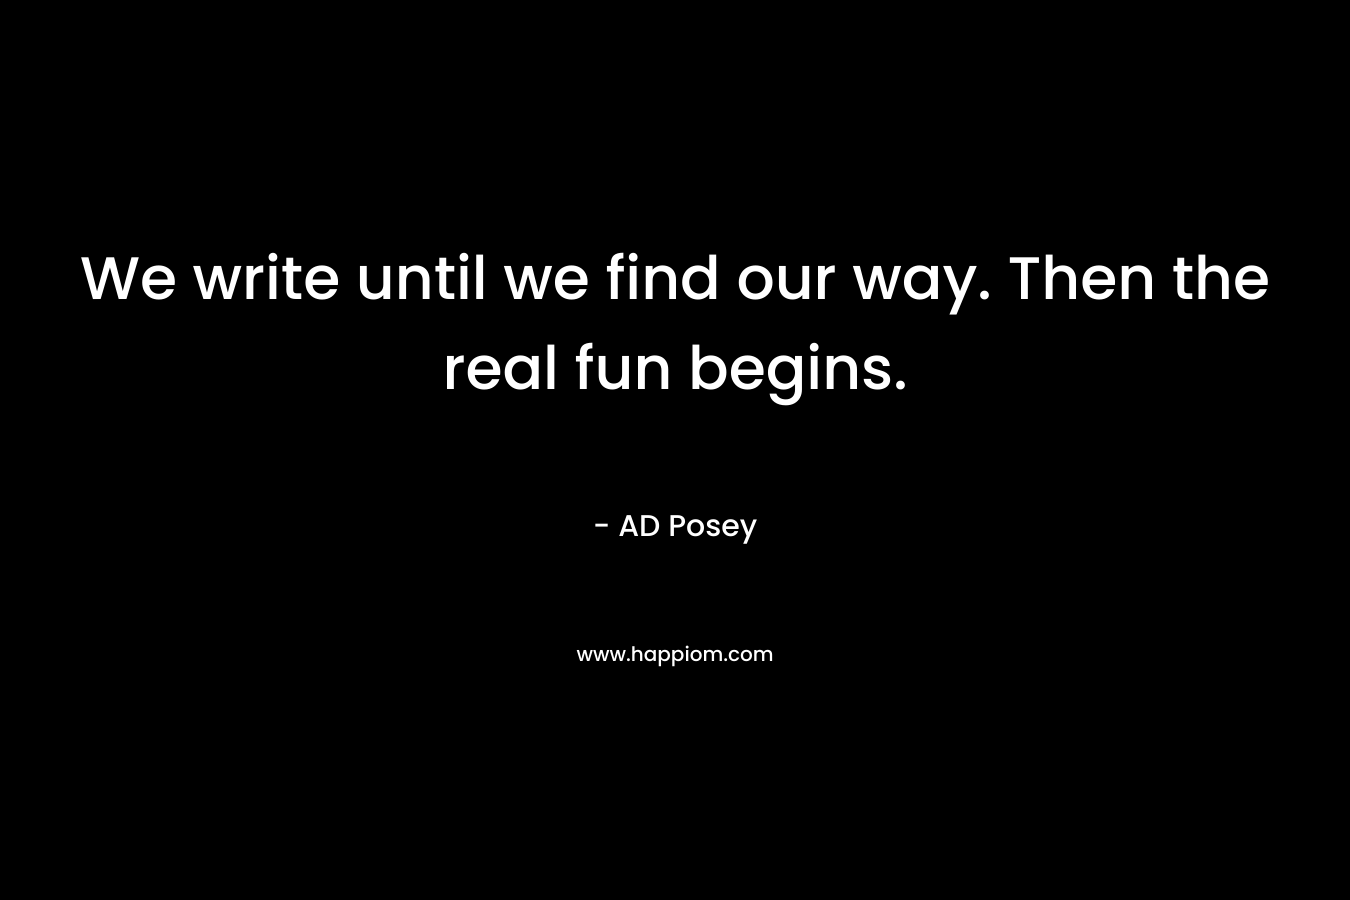 We write until we find our way. Then the real fun begins.